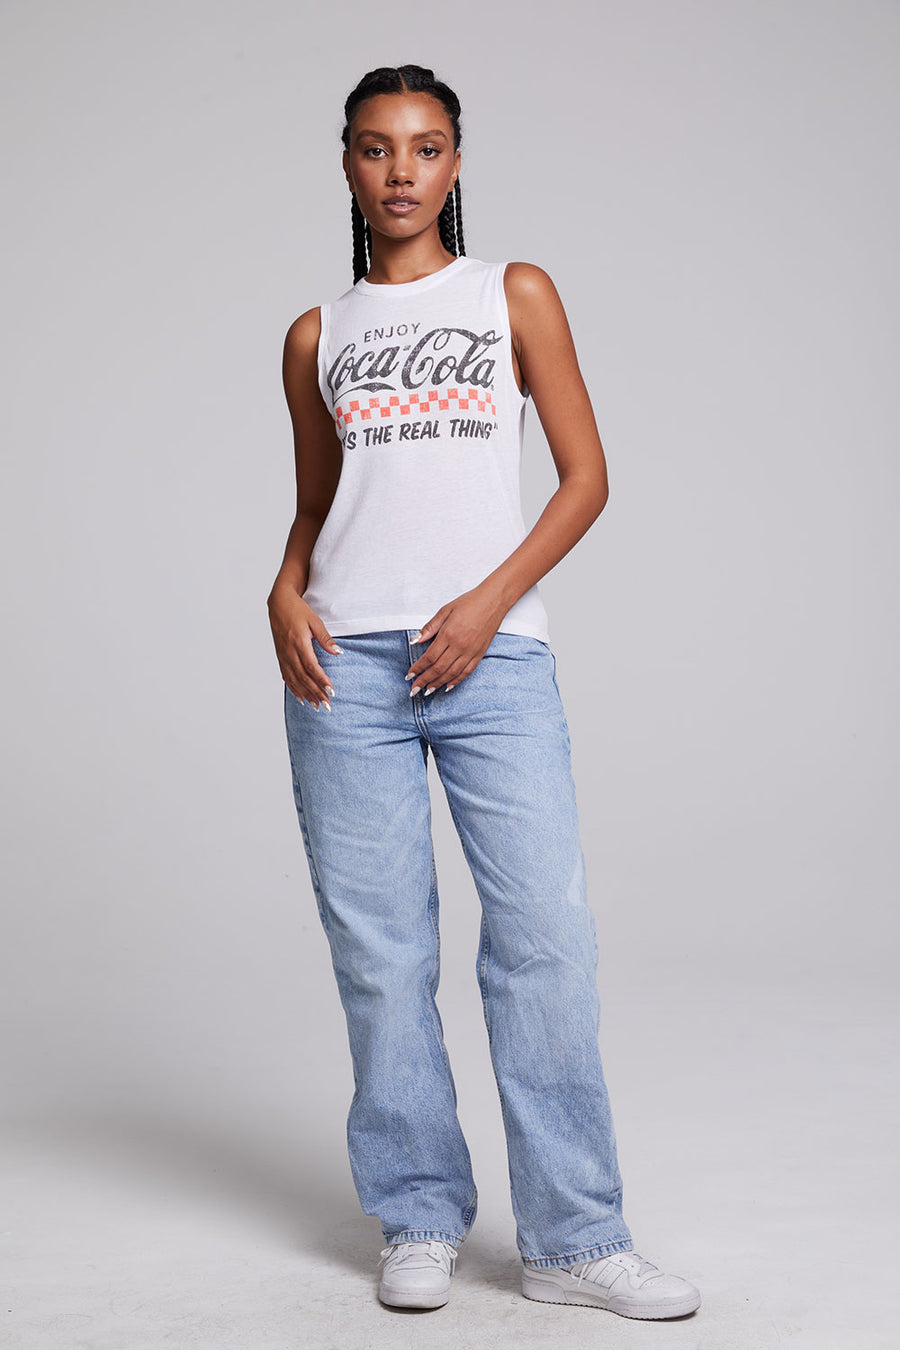 Coca-Cola The Real Thing Muscle Crop Tee WOMENS chaserbrand